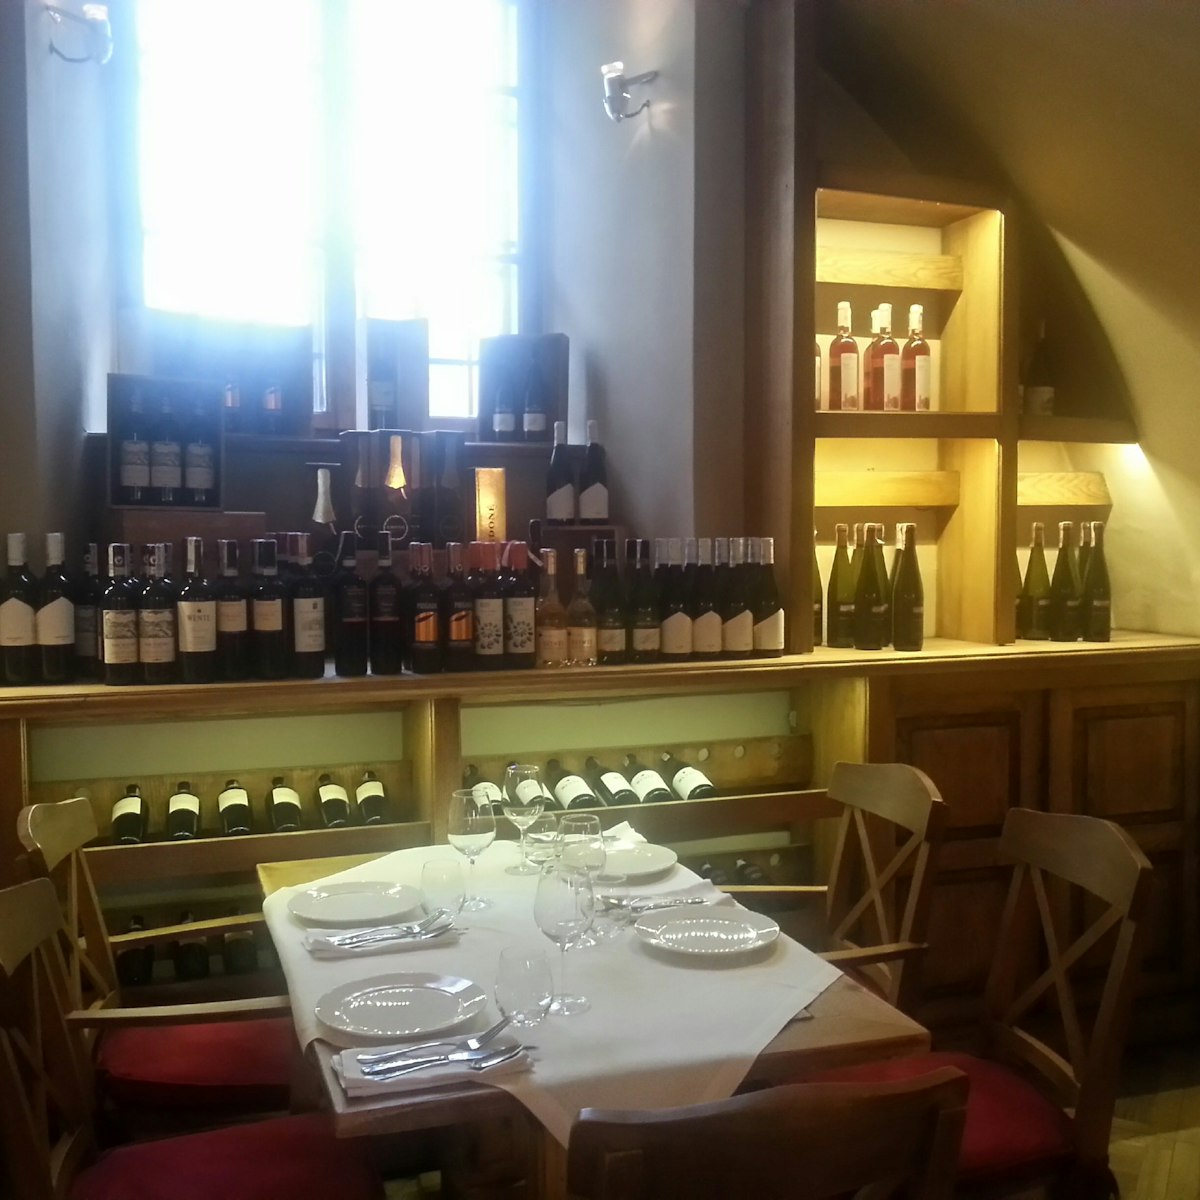 One of La Campana Trattoria's indoor rooms, lined with wine bottles